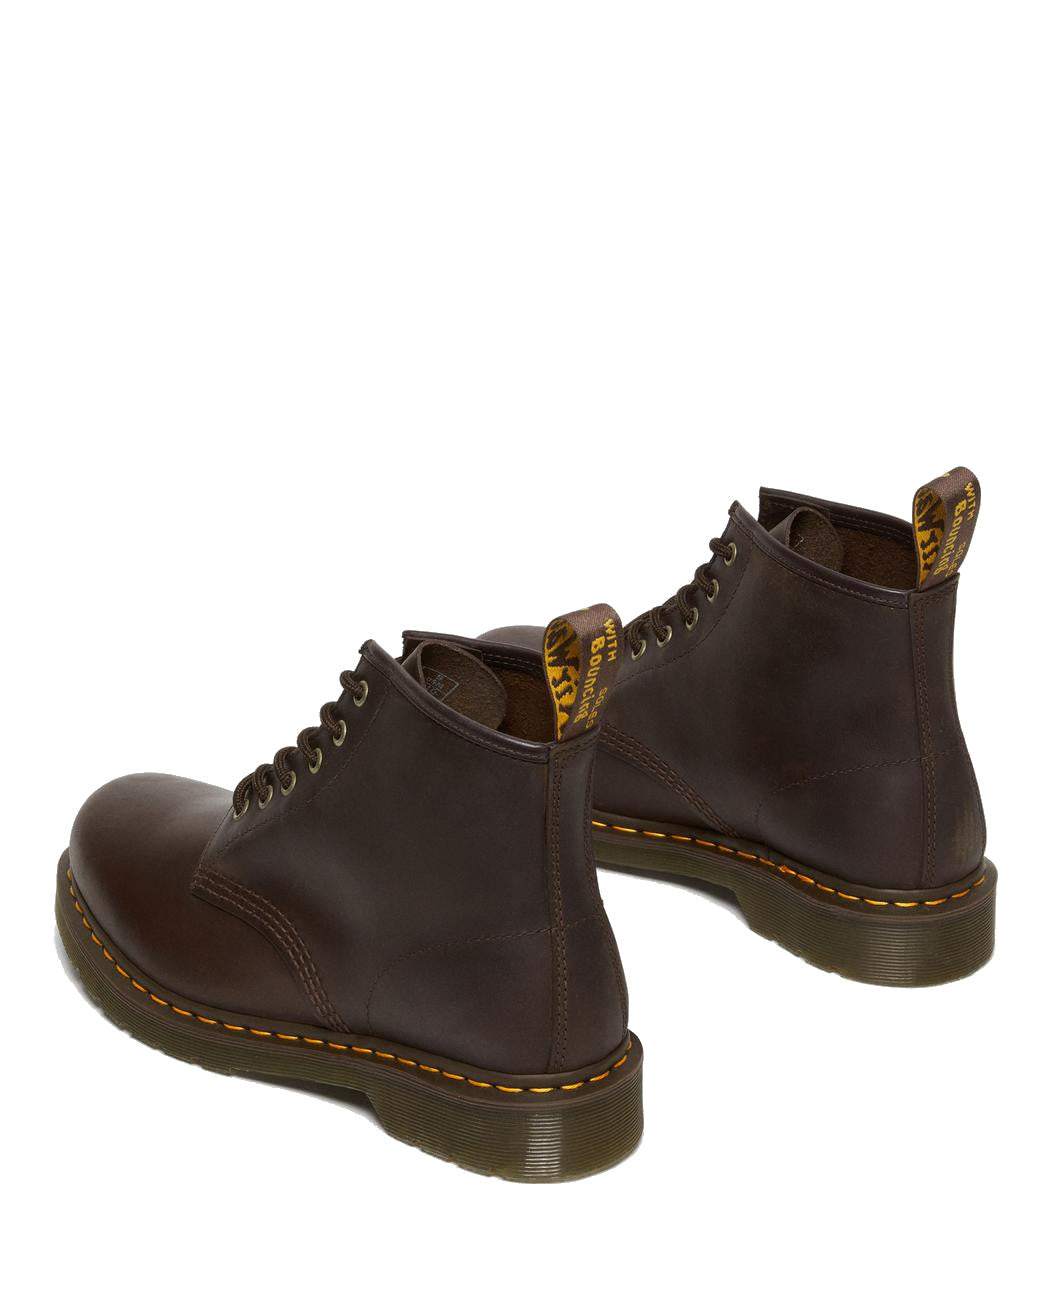 Dr Martens 101 Crazy Horse Leather Ankle Boots - Dark Brown